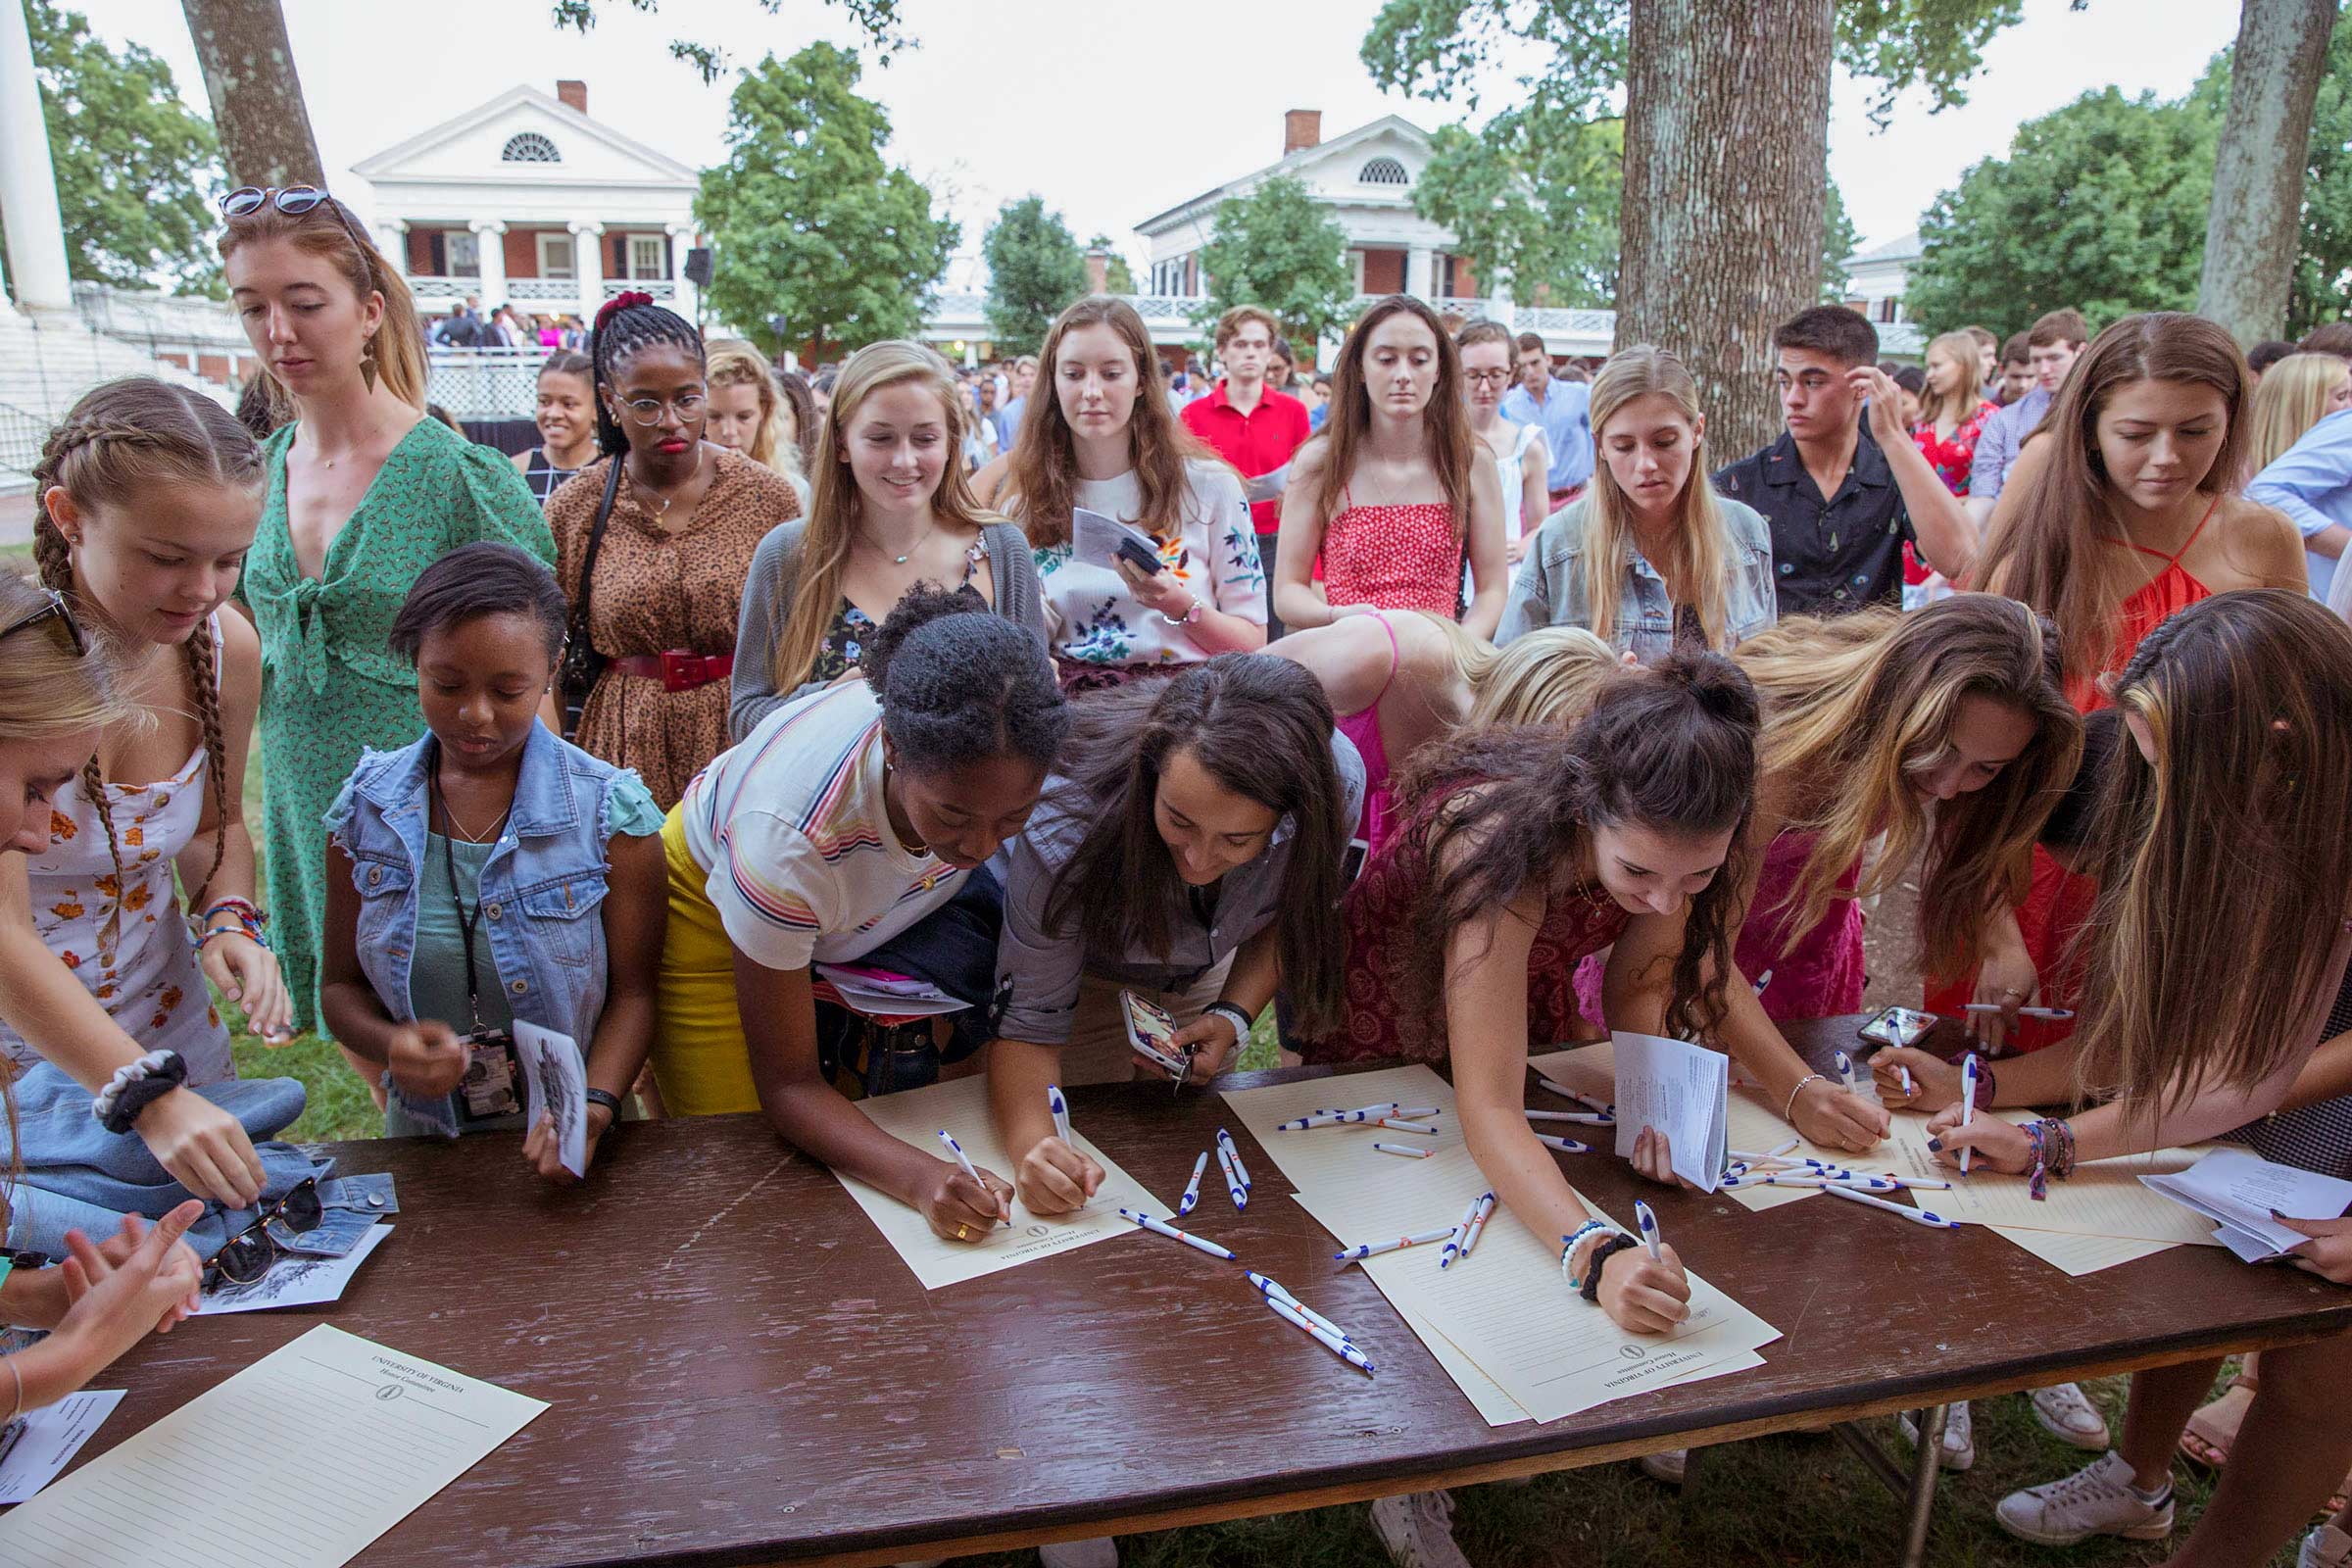 People stand in line as a table full of new students sign the honor code on the Lawn